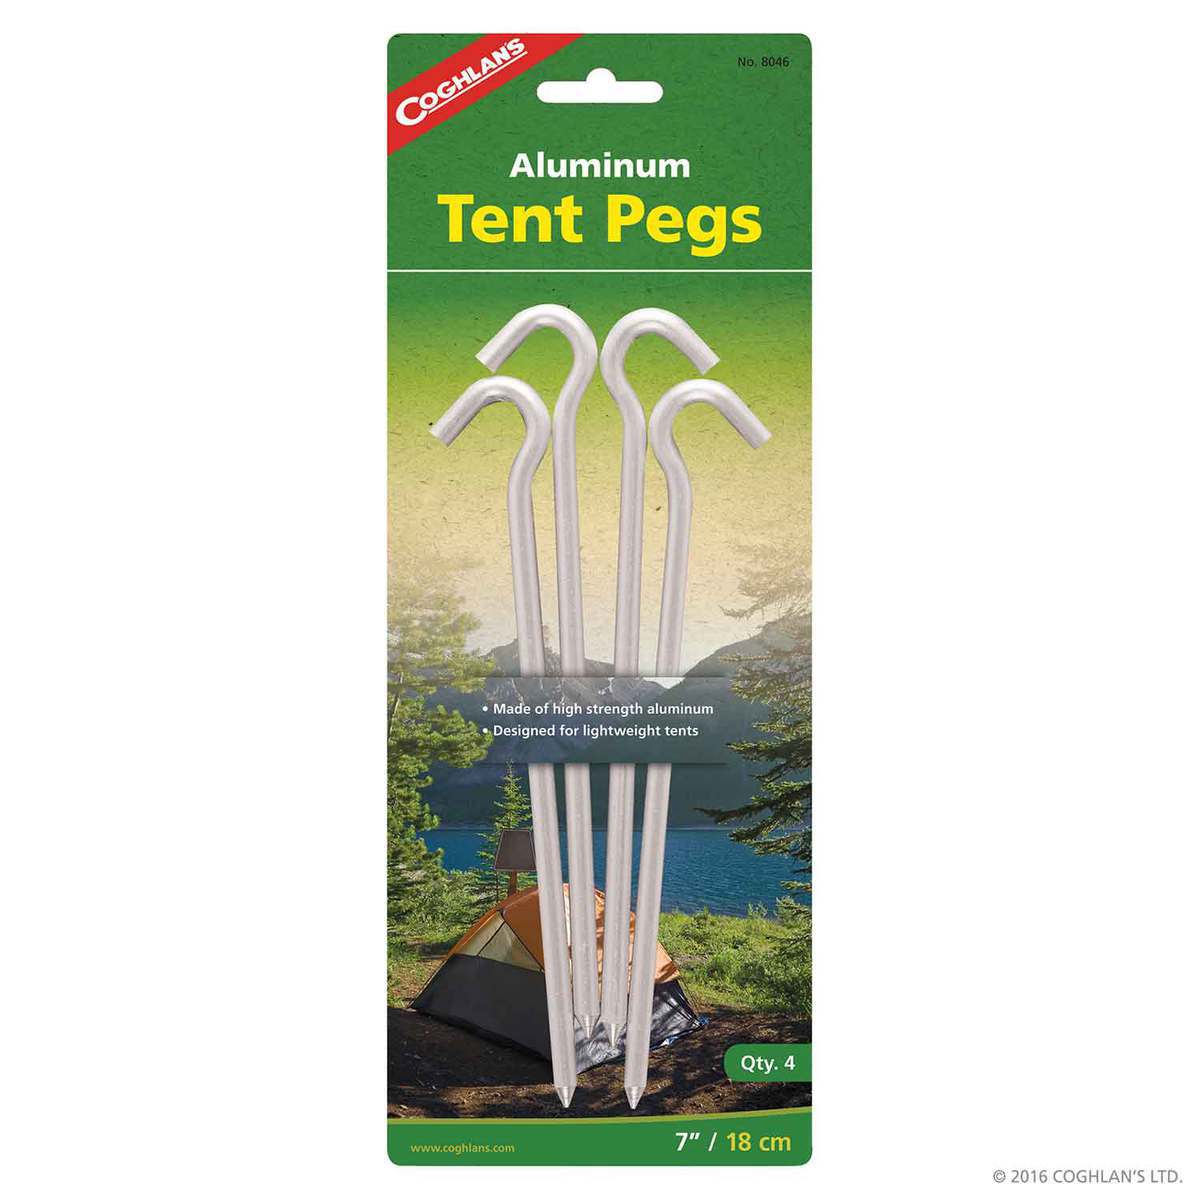 Canvas Tent Repair Kit by Coghlan's